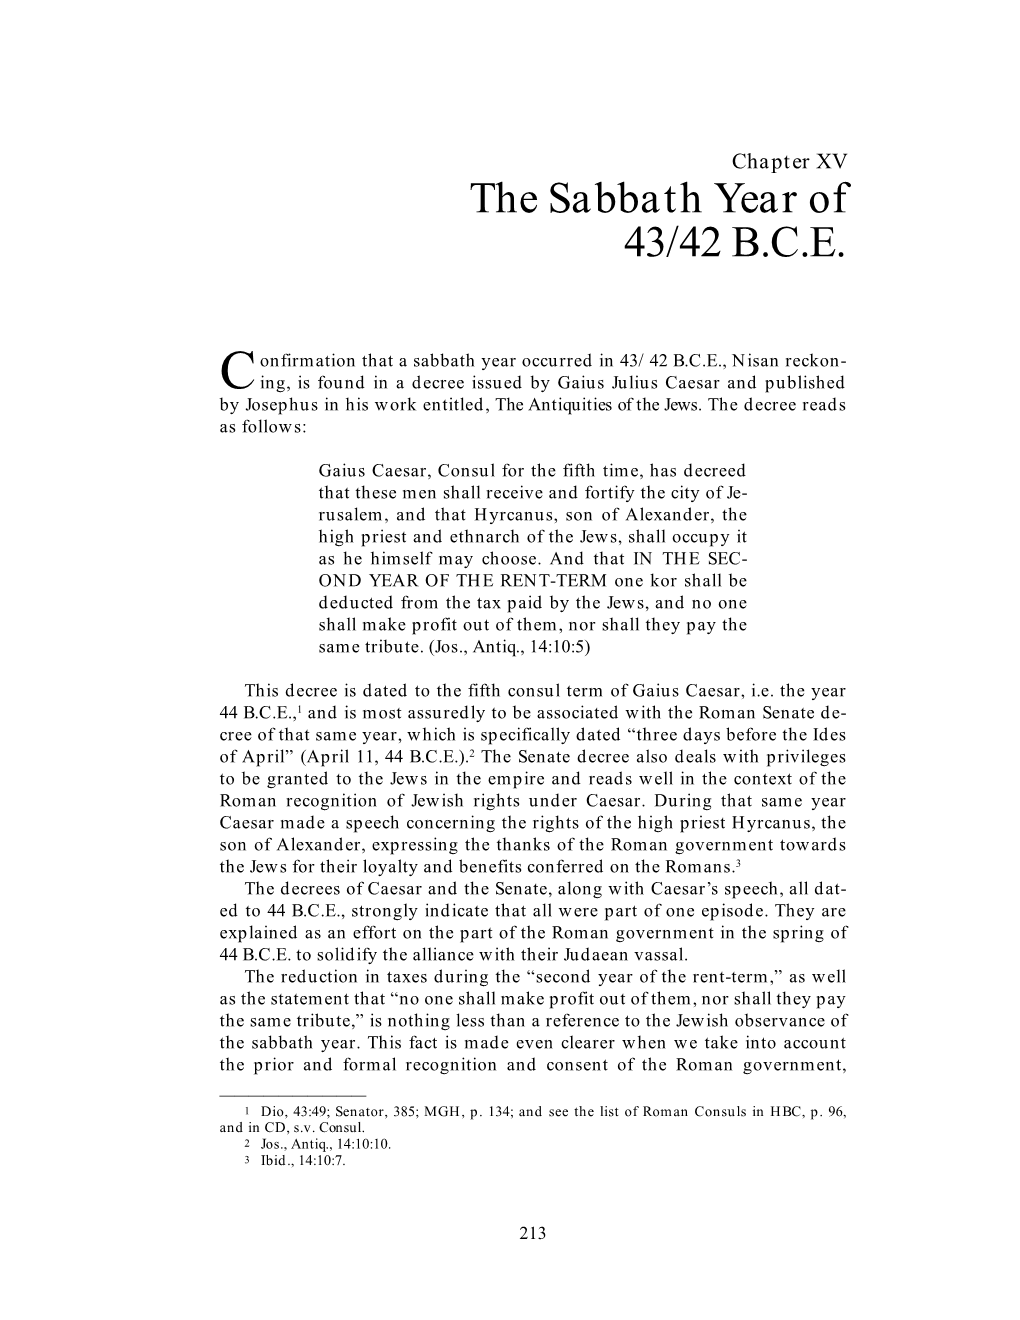 The Sabbath and Jubilee Cycle Allowing the Jews to Observe the Sabbath Year